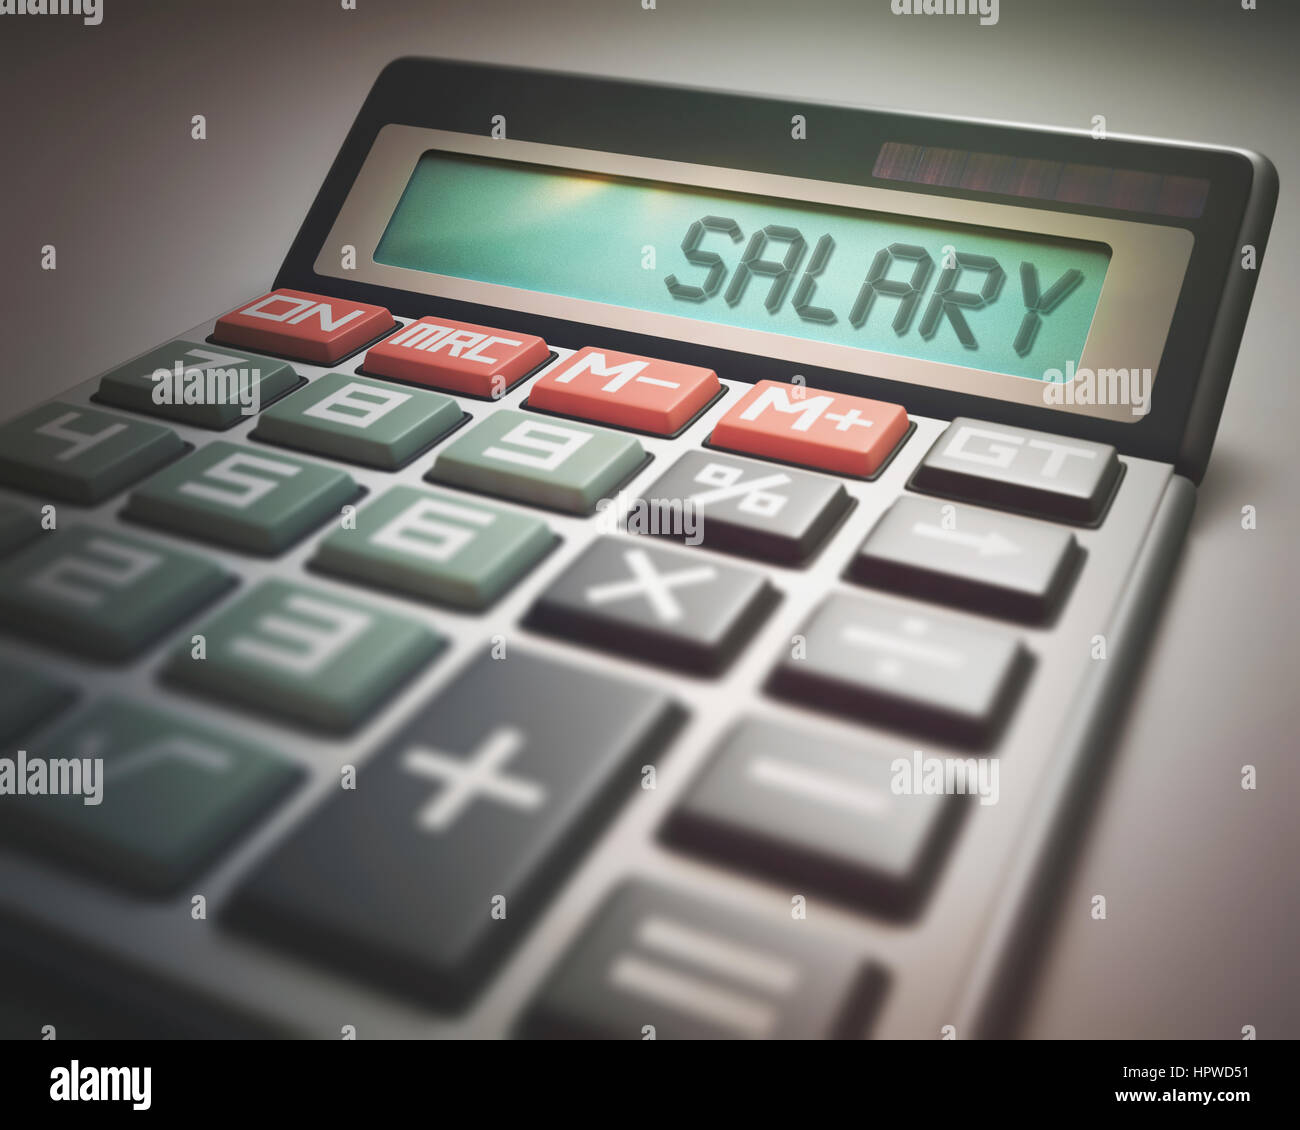 Calculator with the word salary, illustration. Stock Photo